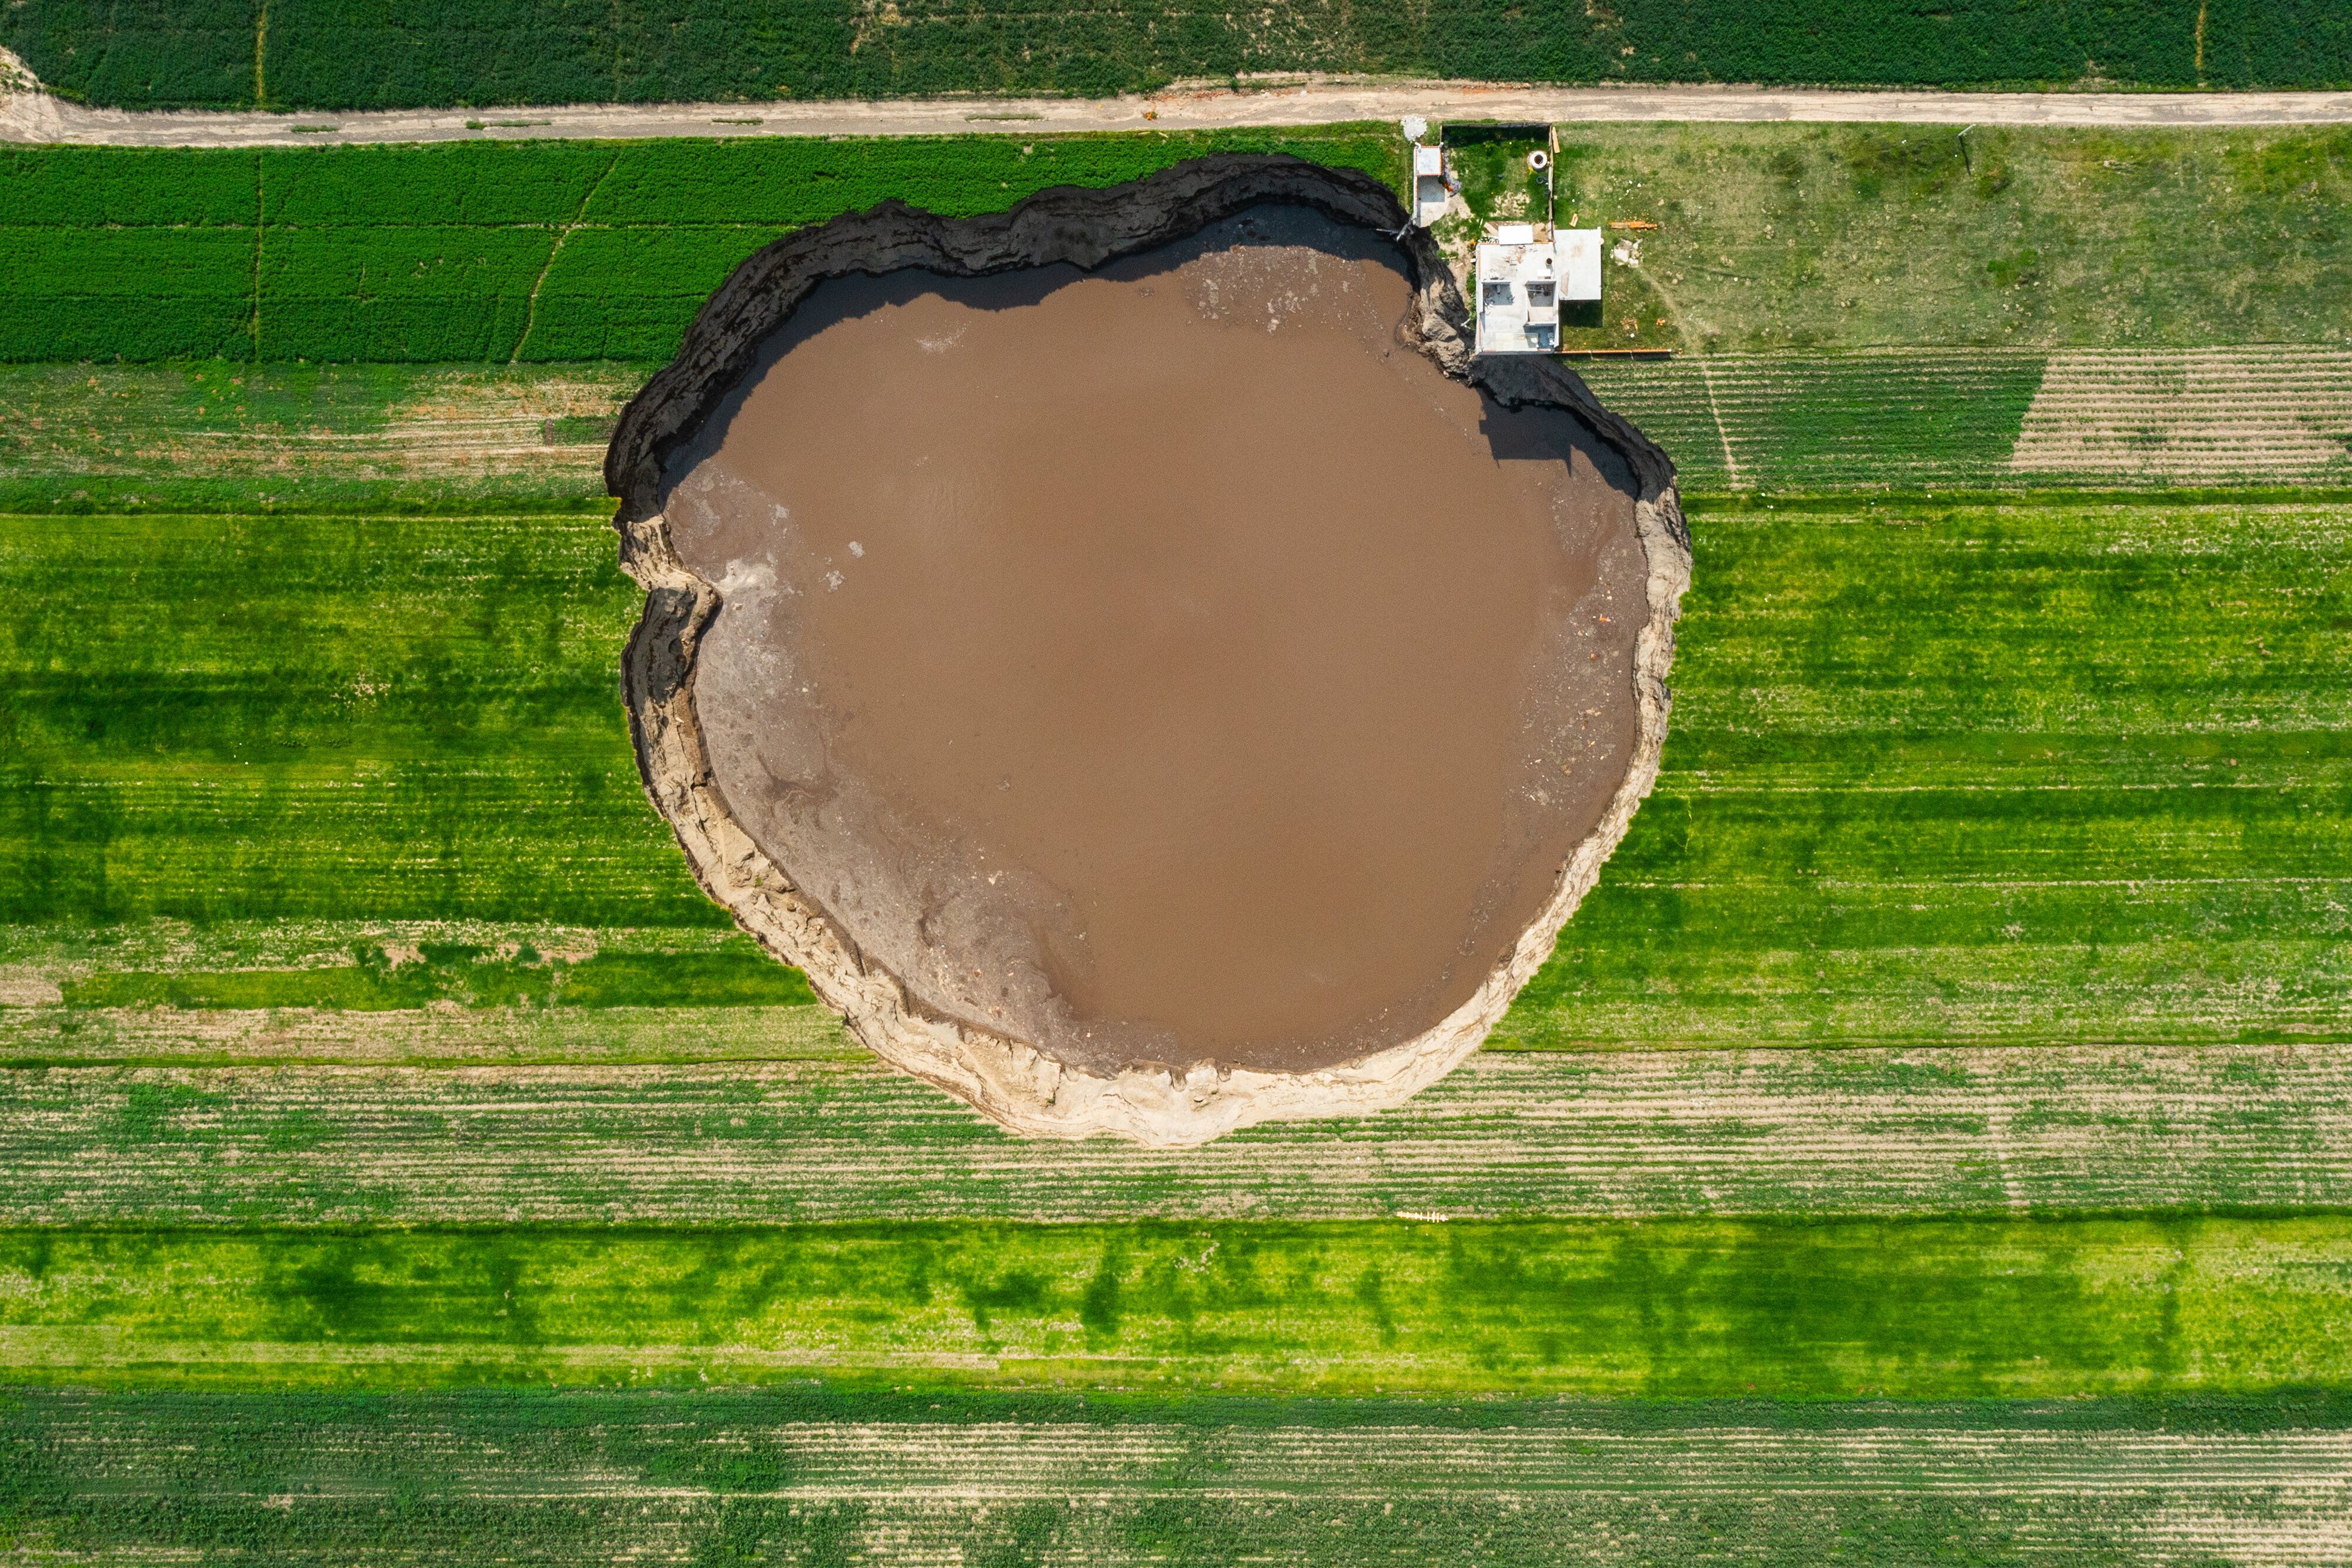 The large sinkhole that appeared in late May at a farm in central Mexico has grown larger than a football field, begun swallo